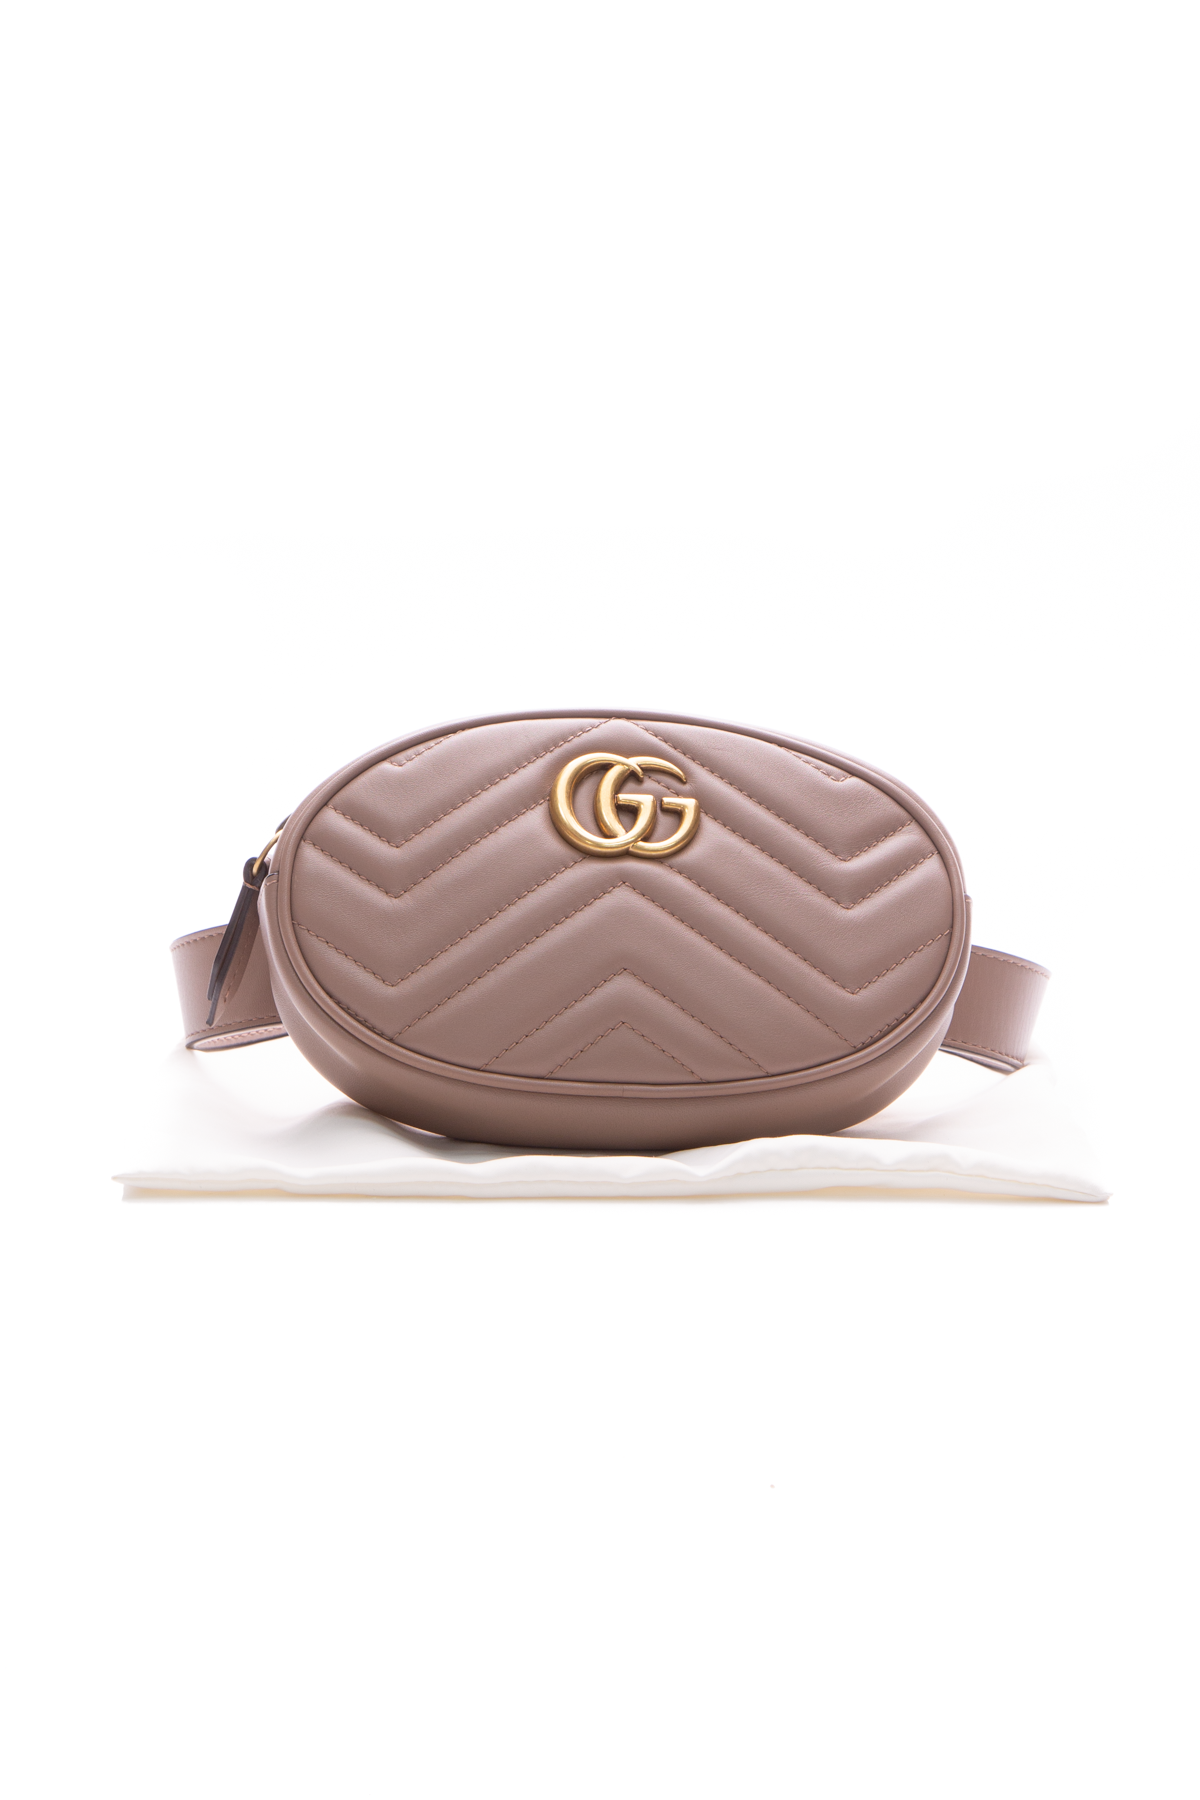 Gucci Marmont Belt Bag - Couture USA